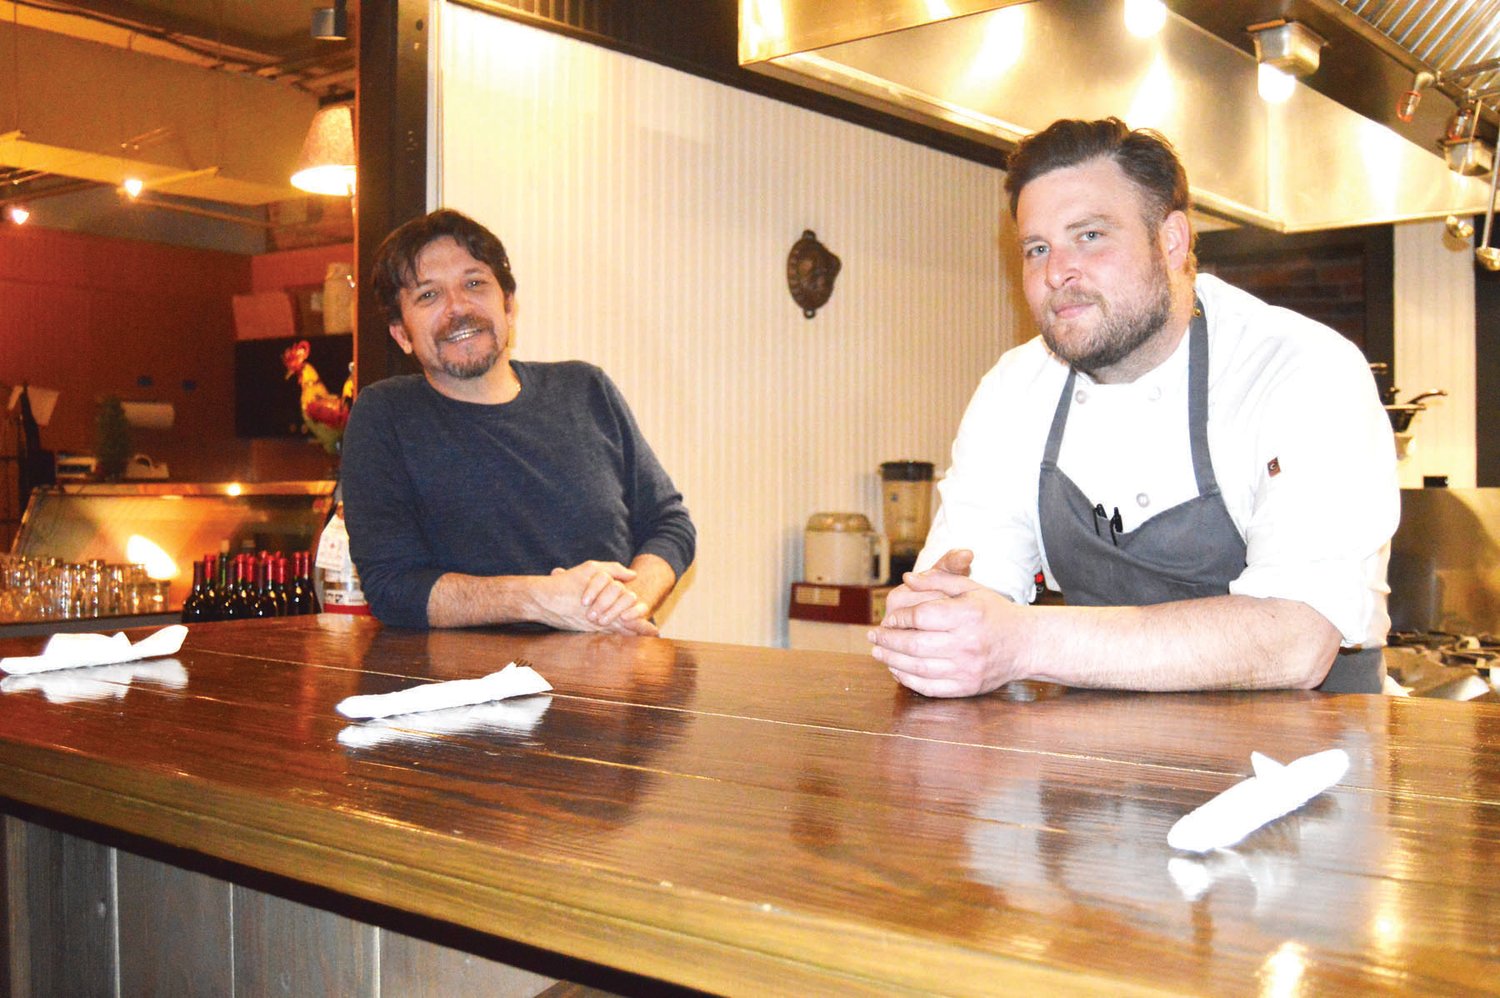 Owner Andre Jurema, left and chef Justin McLain, stand at the new chef’s table at Andre’s Wine & Cheese Shop in Doylestown. The shop has transitioned to a full-service restaurant. Photograph by Susan S. Yeske